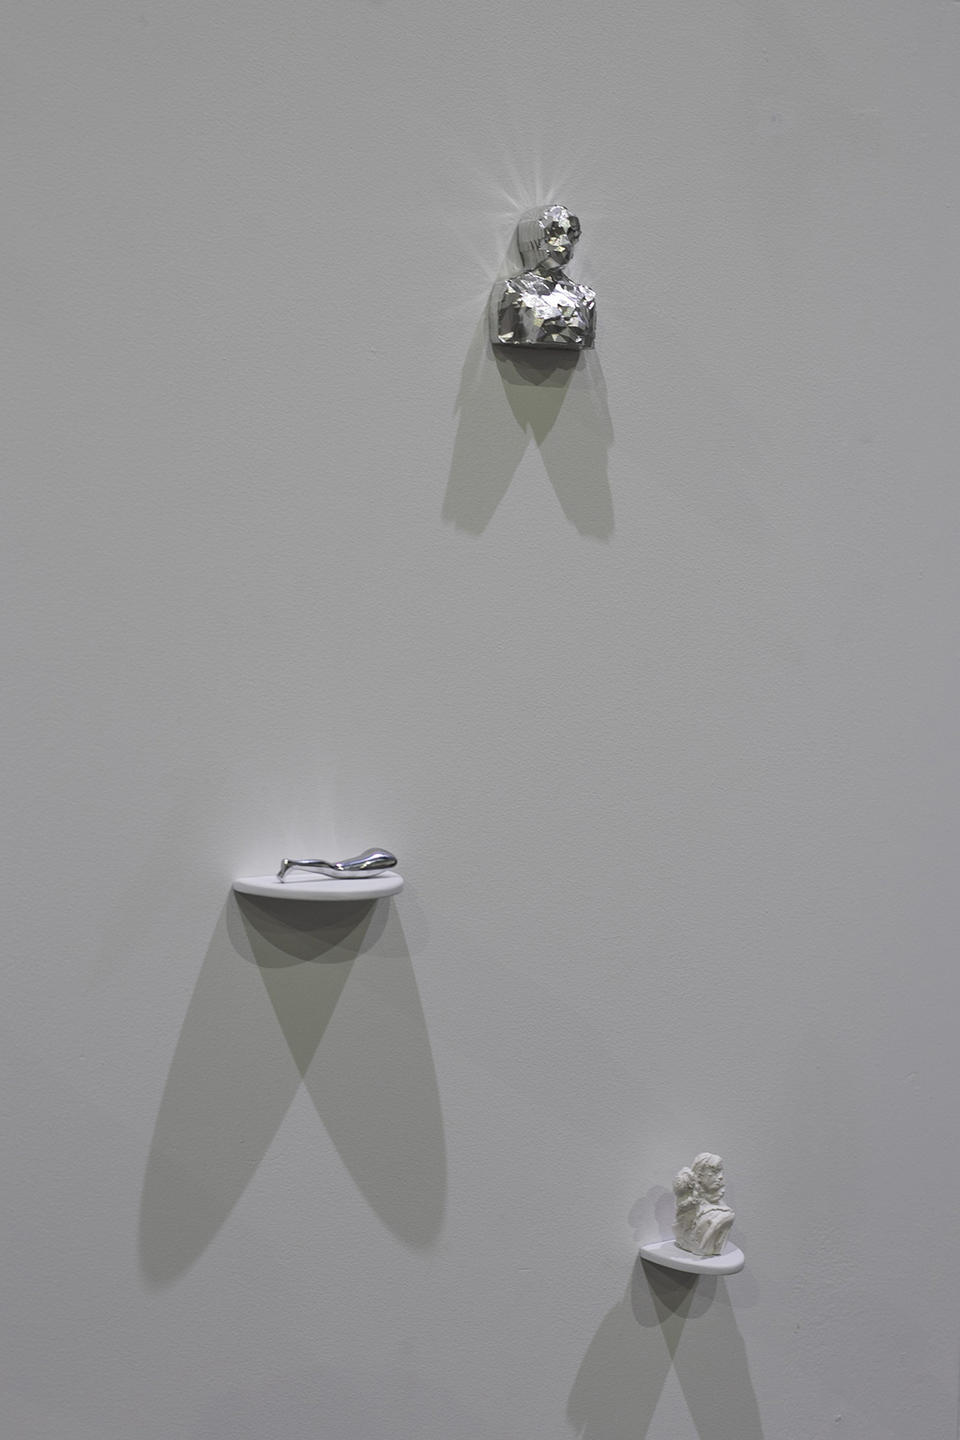 A detail shot of multiple sculptures on individual shelves